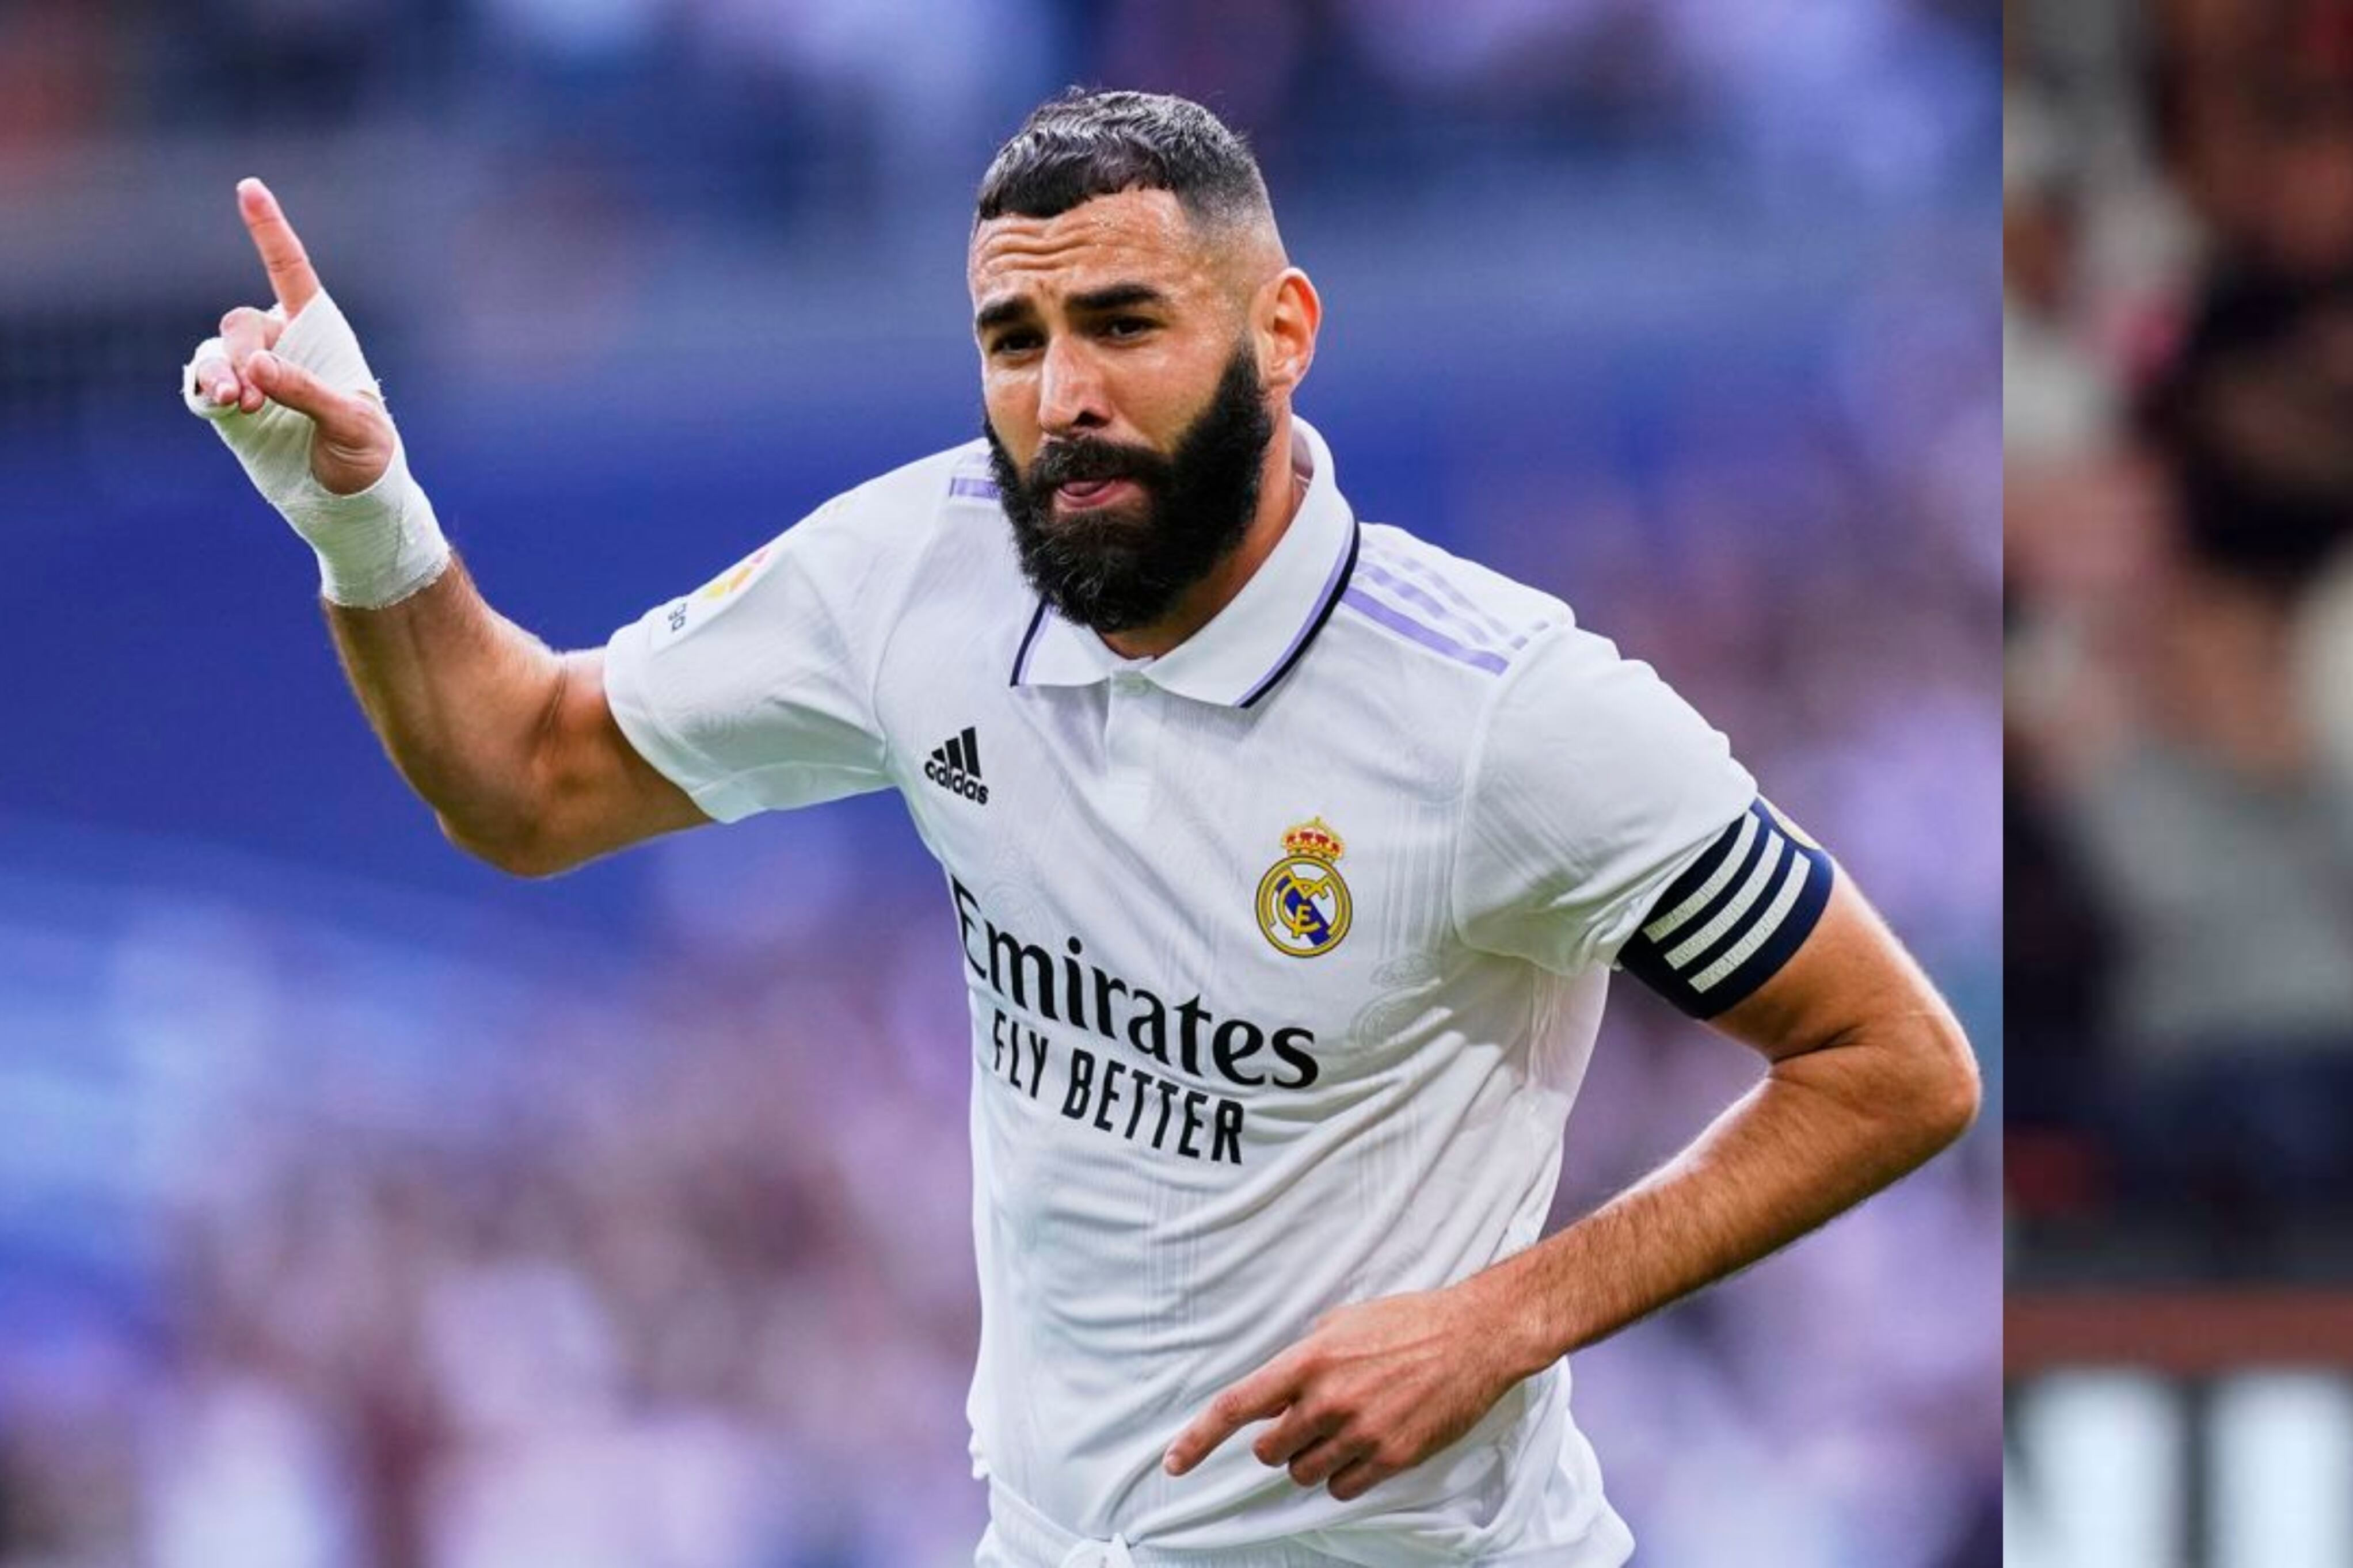 While Benzema will earn 200 million, this is the salary offered to Raúl Jiménez in Arabia